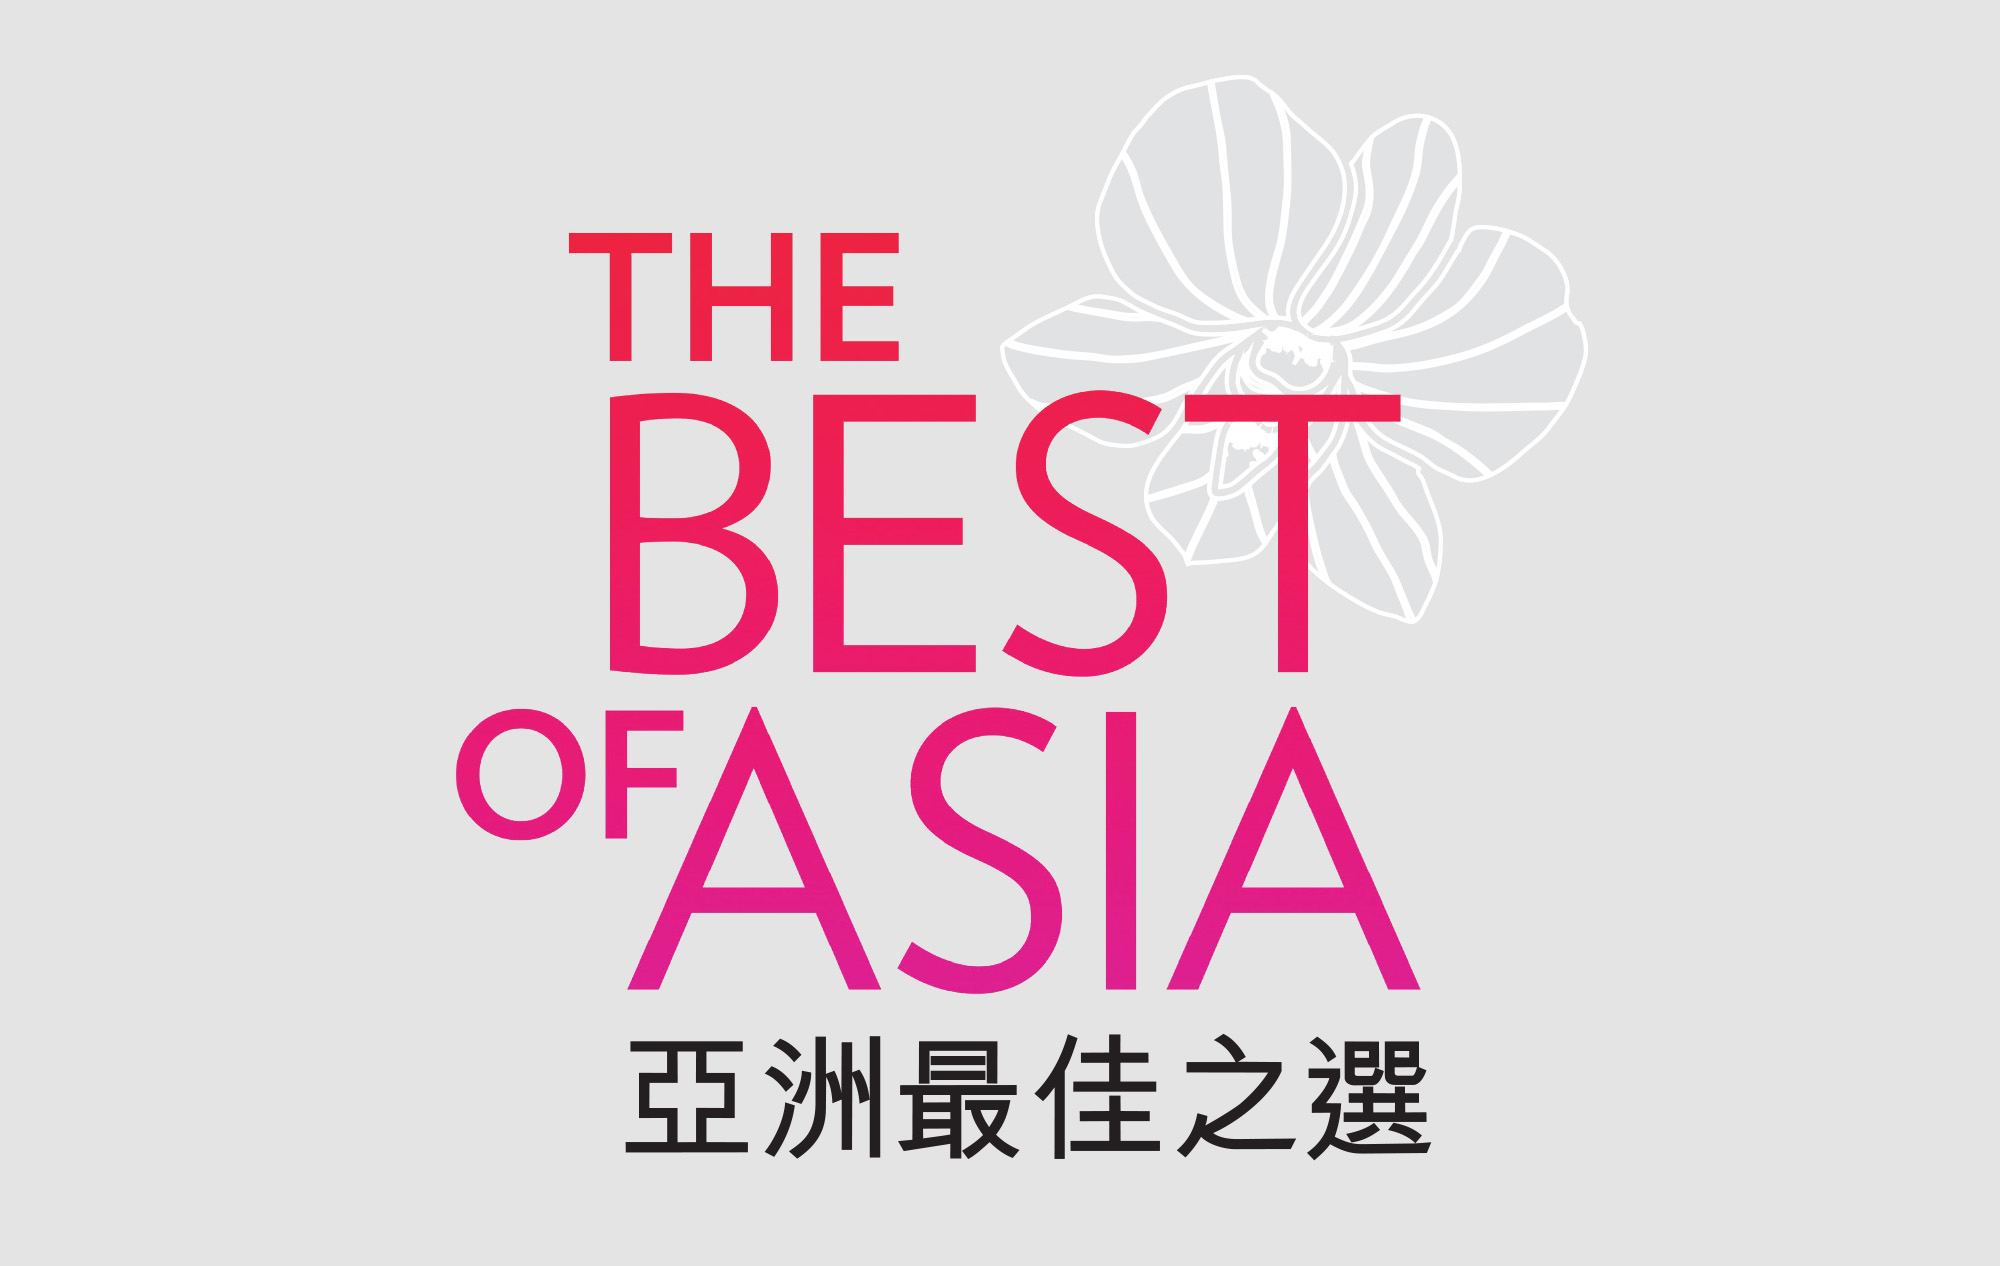 Marco Polo Club Members Choice Awards, best of asia, winner list